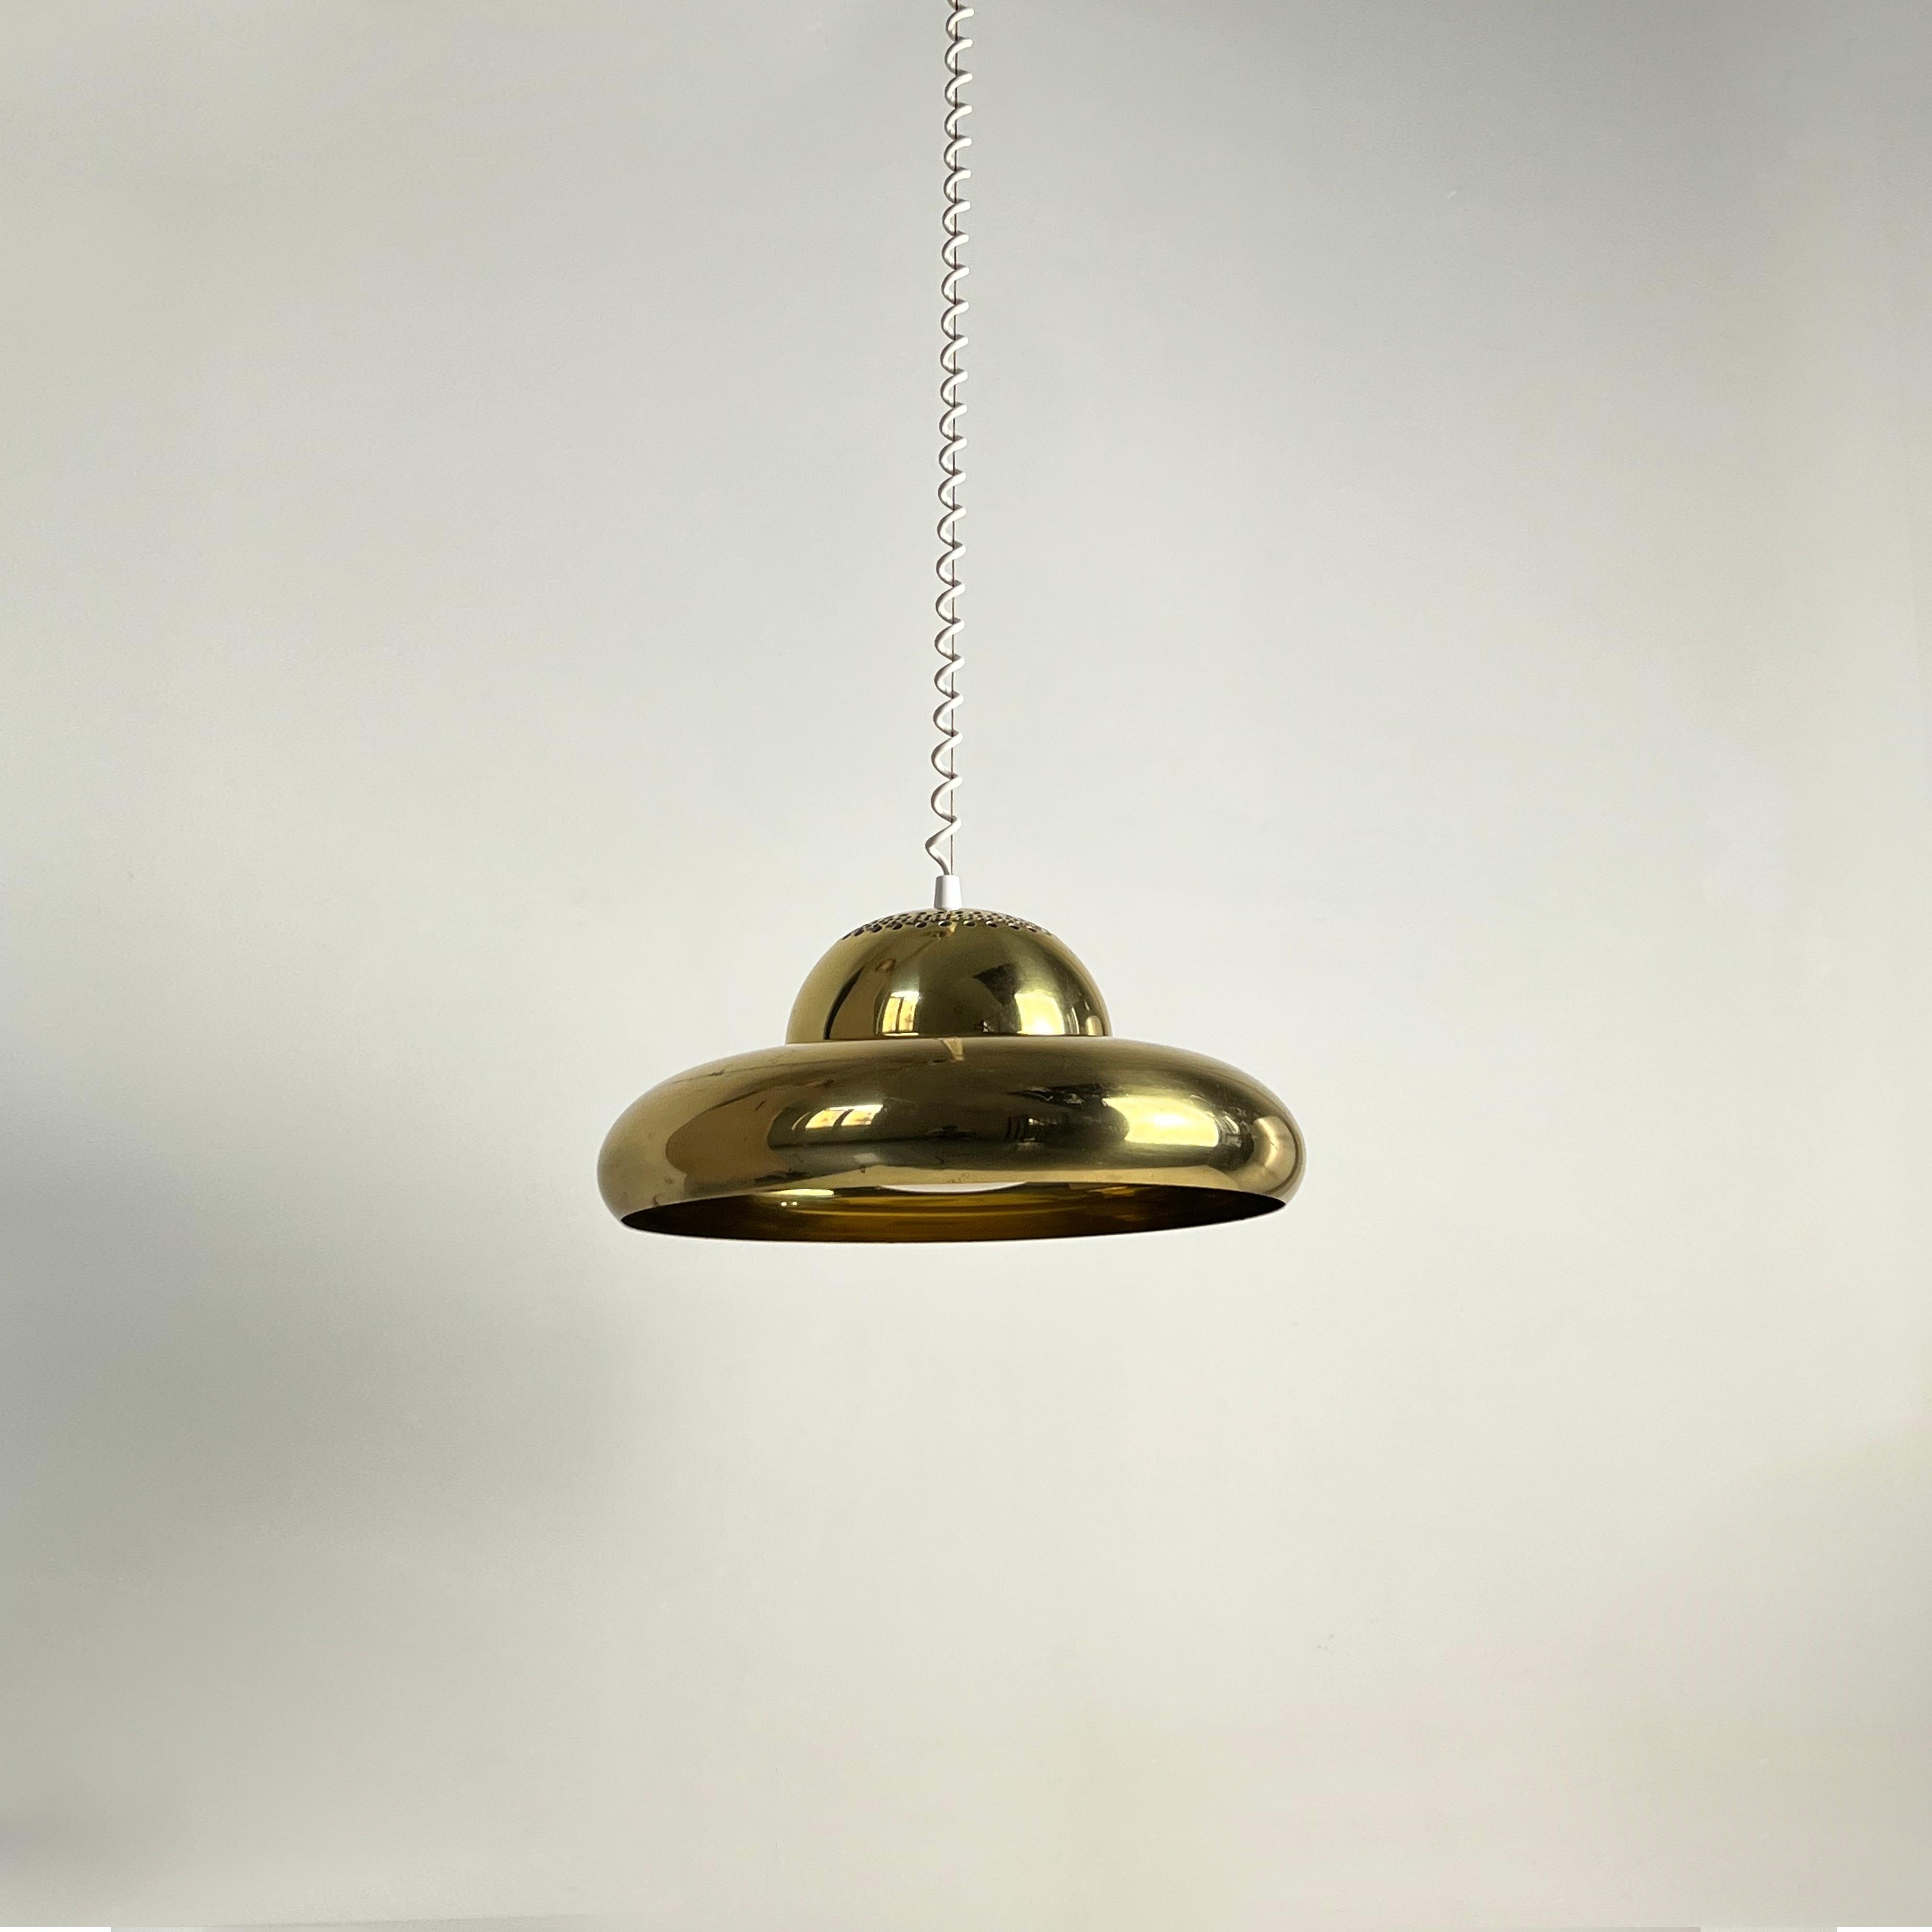 Brass Pendant Fior Di Loto by Afra and Tobia Scarpa for Flos, 1960s For Sale 6